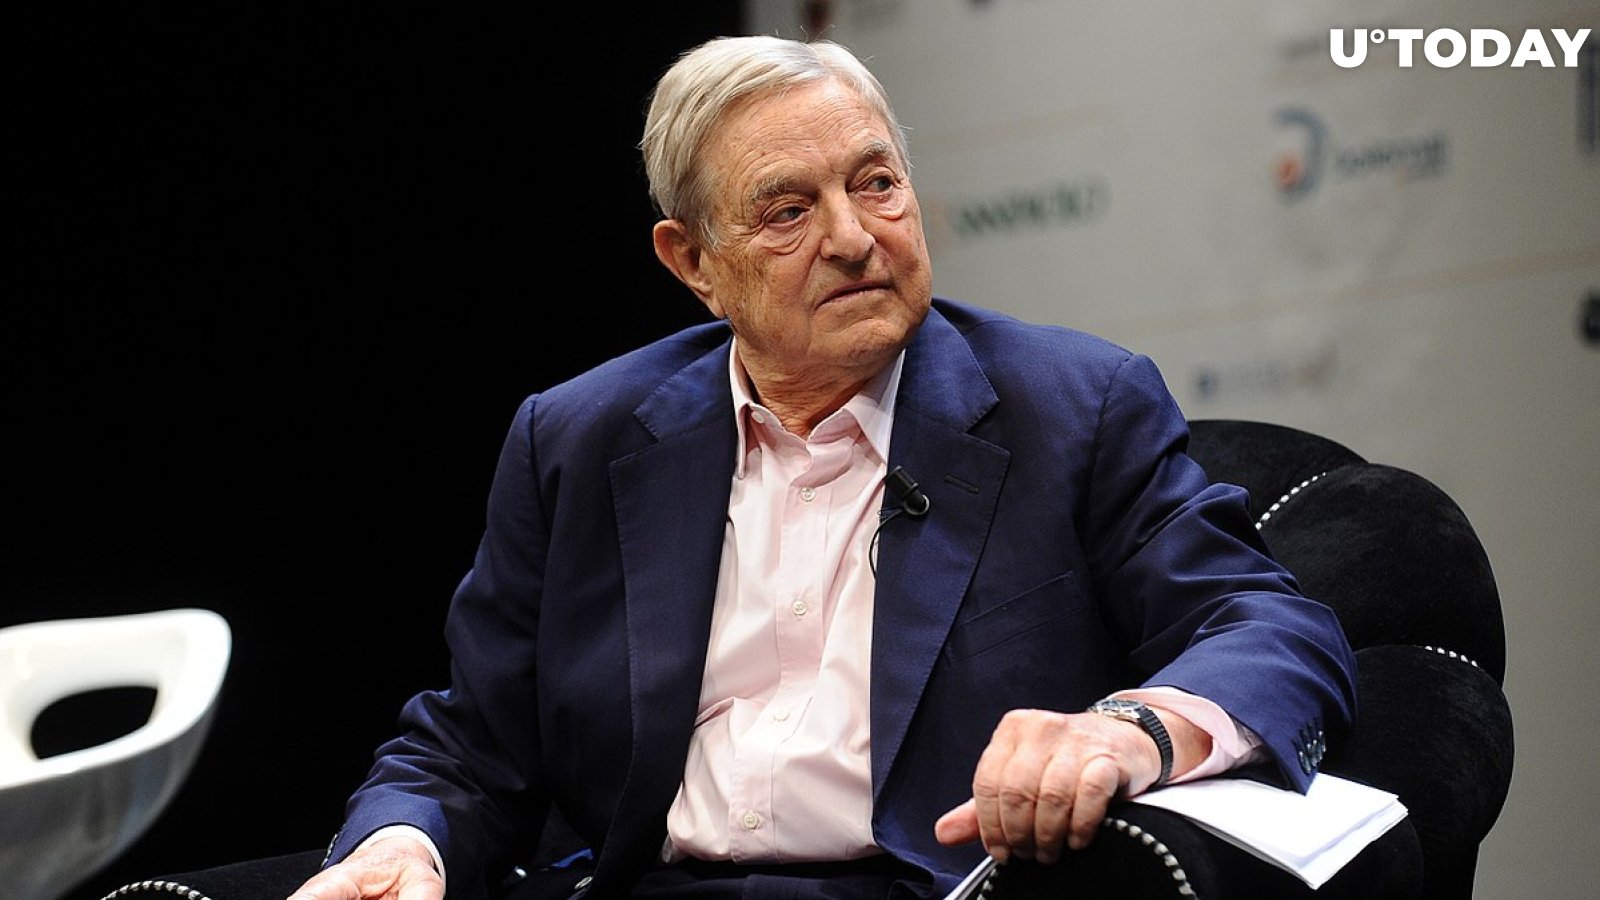 George Soros Fund's Fitzpatrick Prefers Ethereum Over Bitcoin